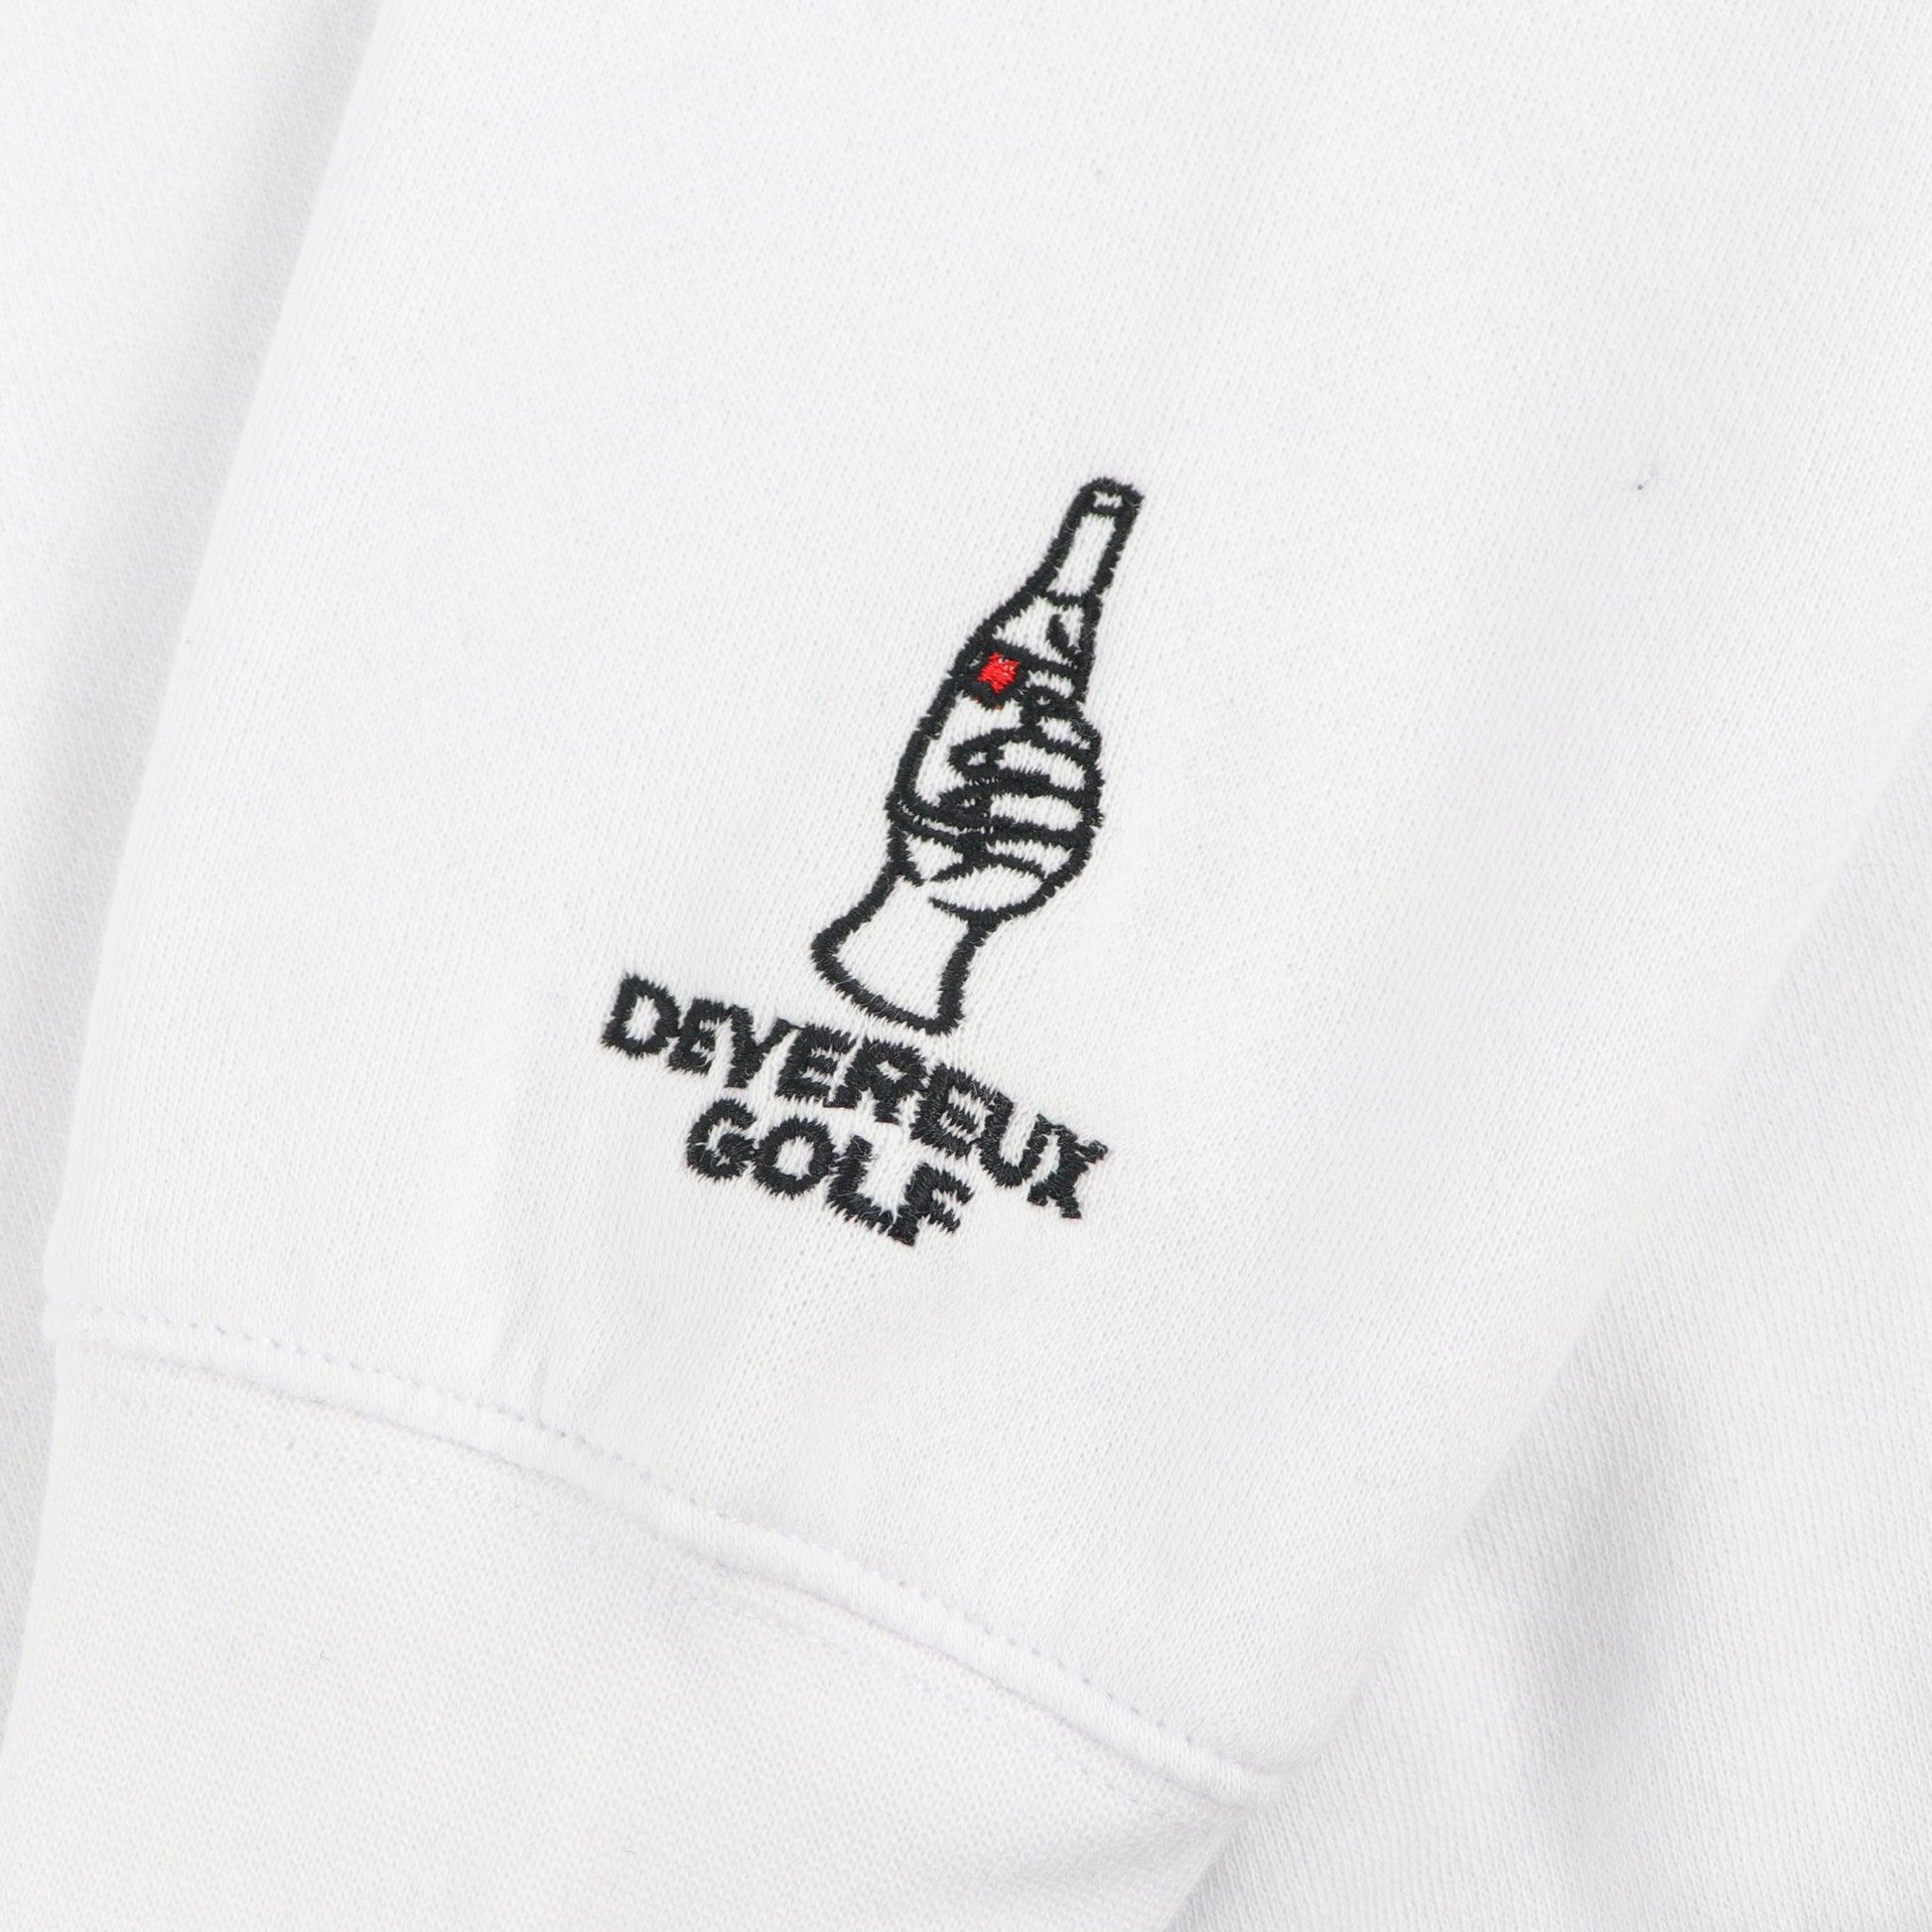 Embroidered Devereaux golf with hand holding bottle of ULTRA. this is featured on lower sleeve by cuff.